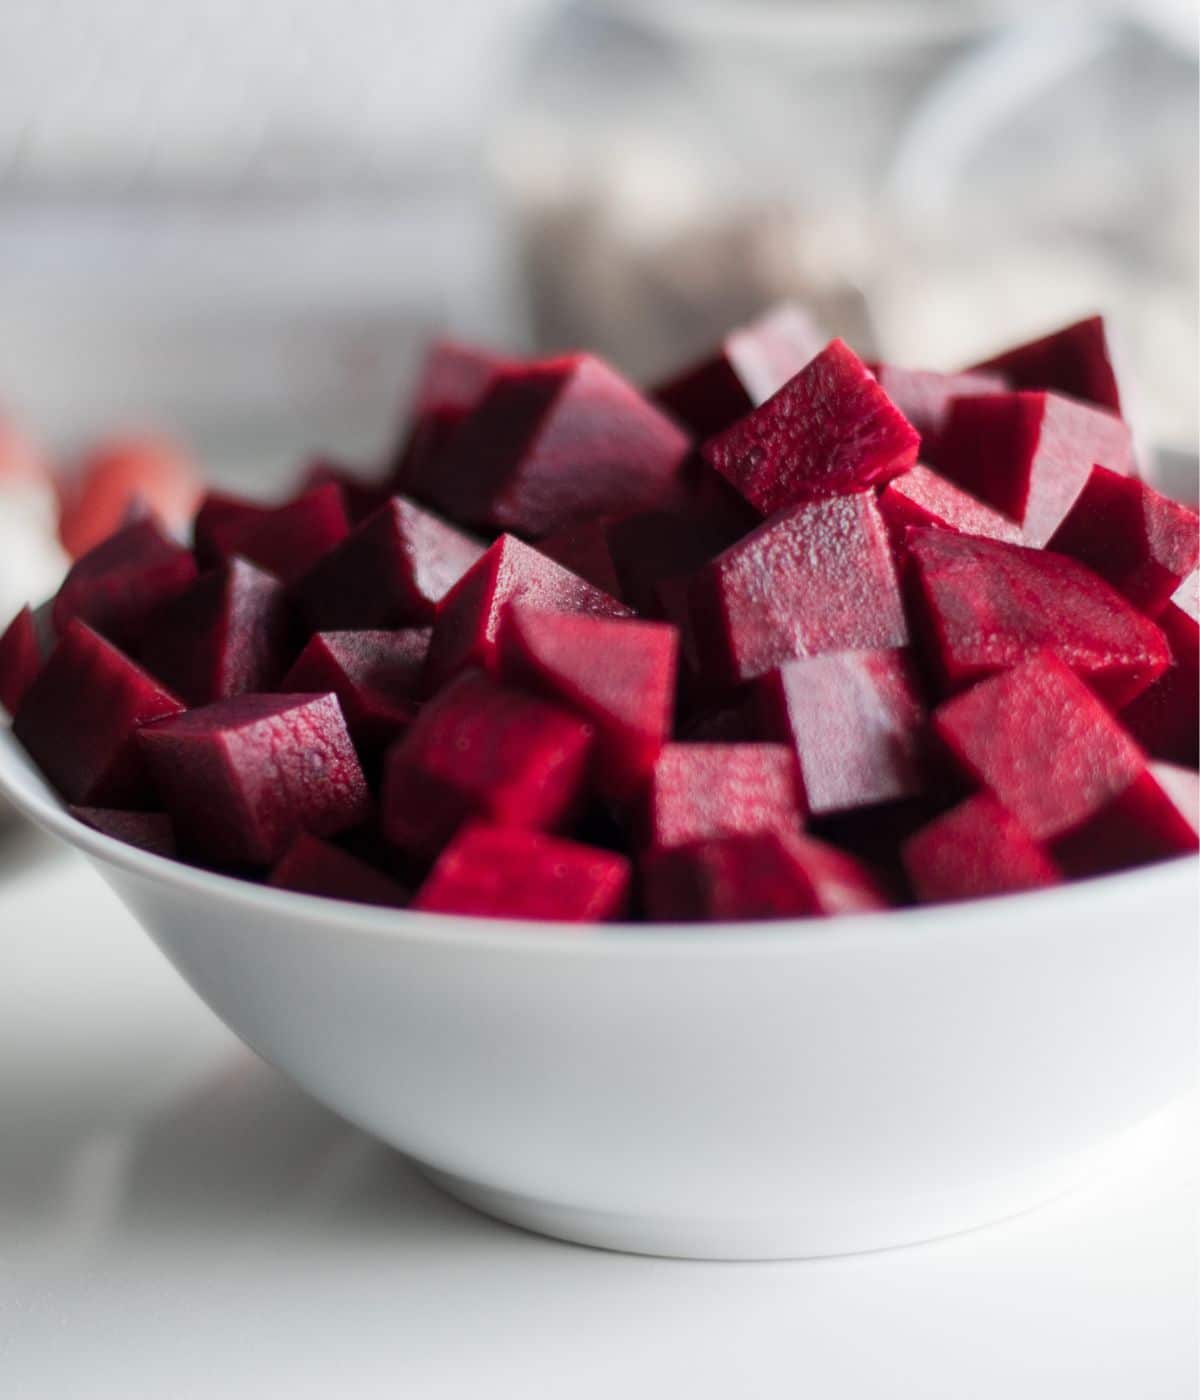 A bowl of cooked beets on the table.